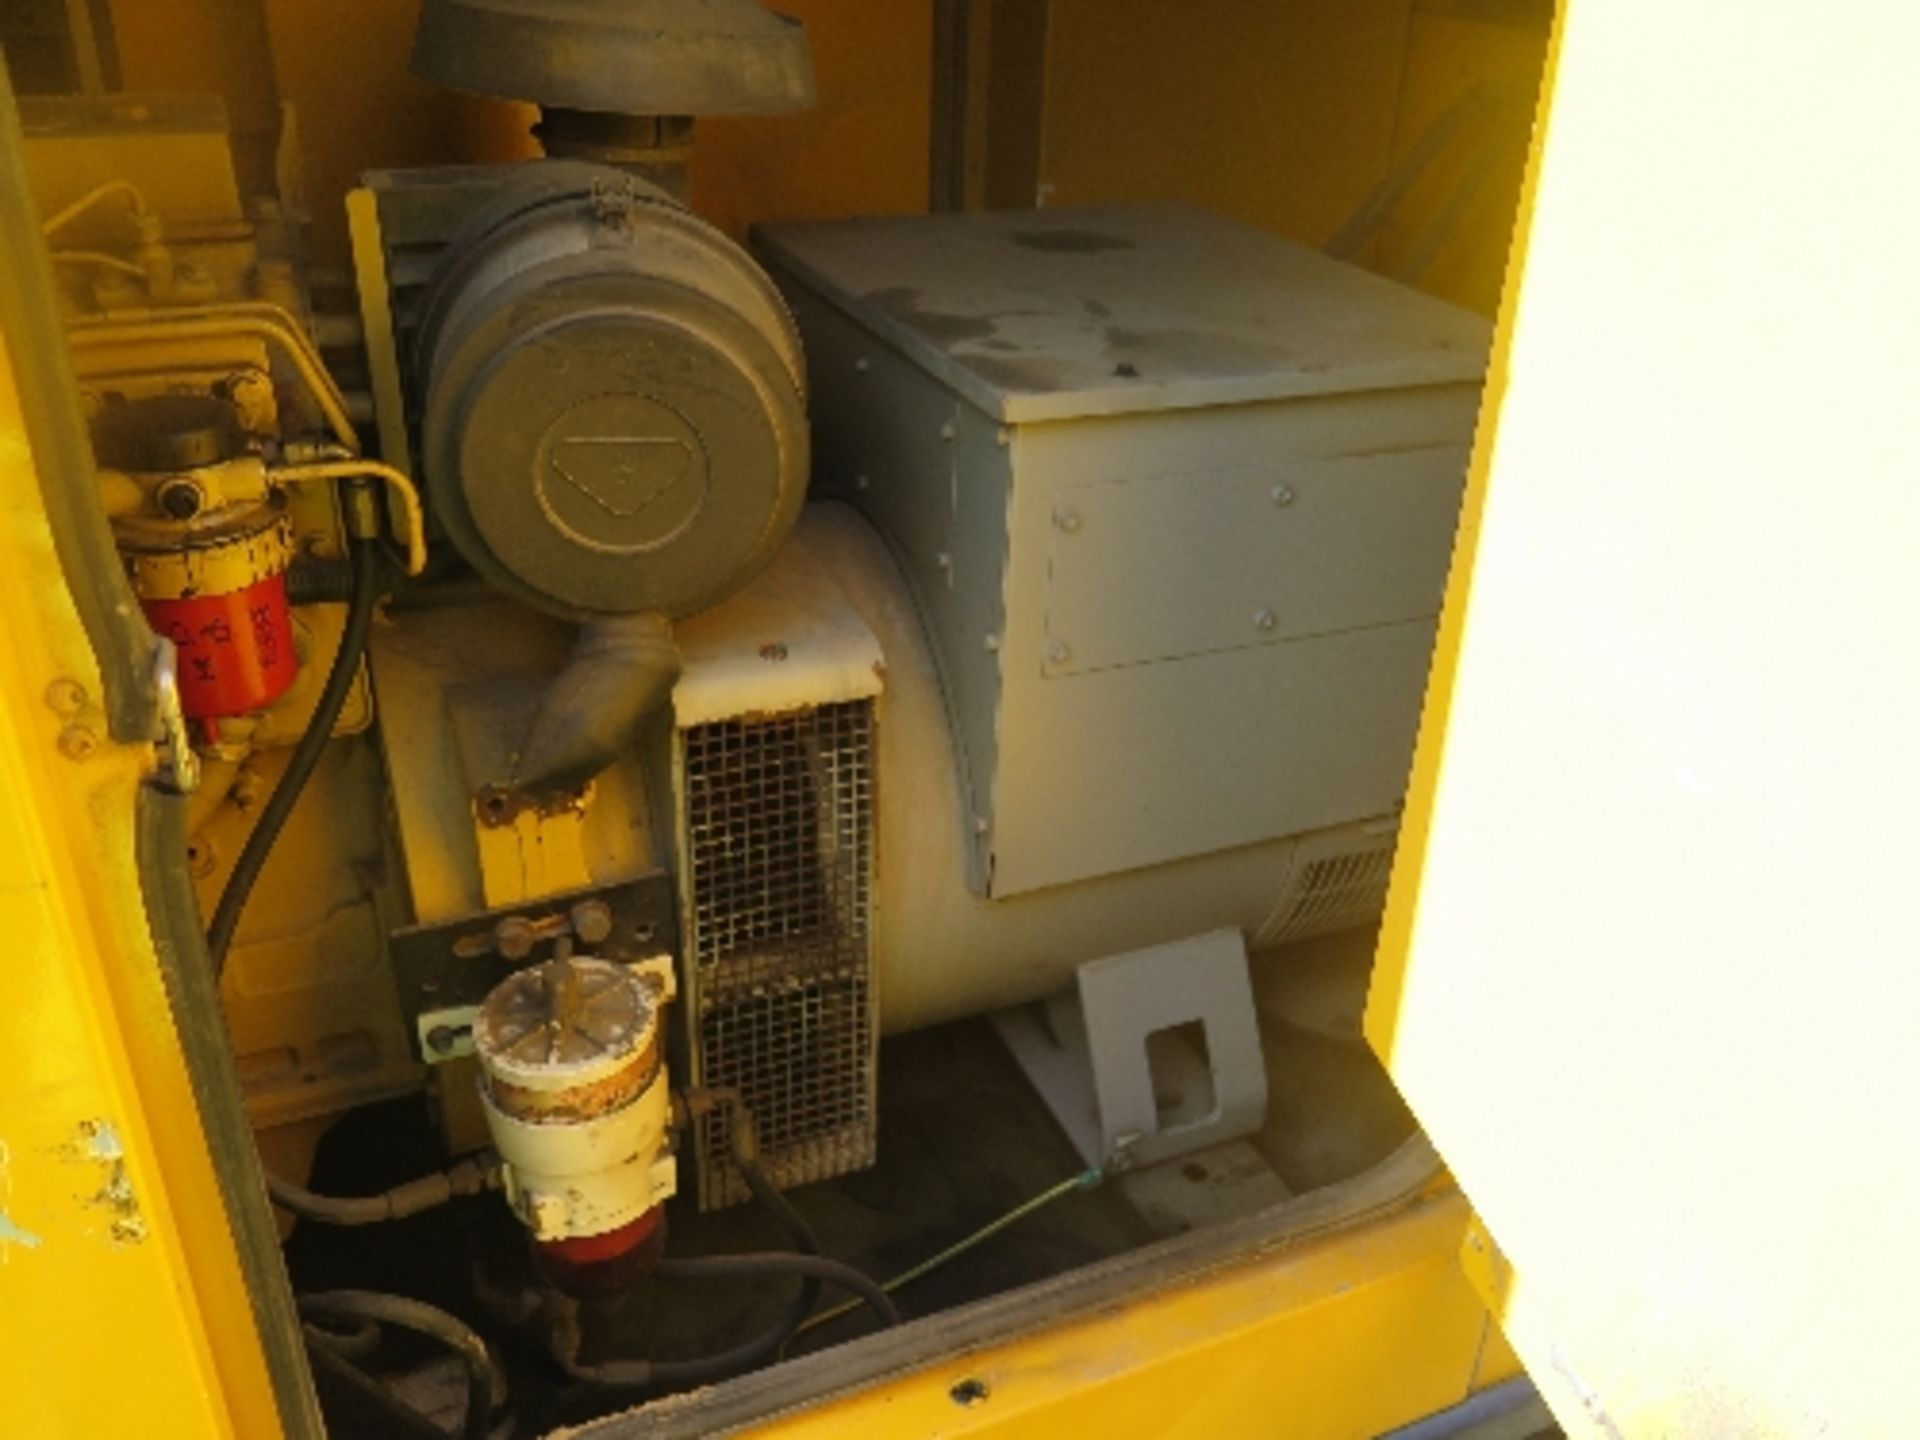 Caterpillar XQE100 generator 18121 hrs 138848
PERKINS - RUNS AND MAKES POWER
ALL LOTS are SOLD - Image 4 of 7